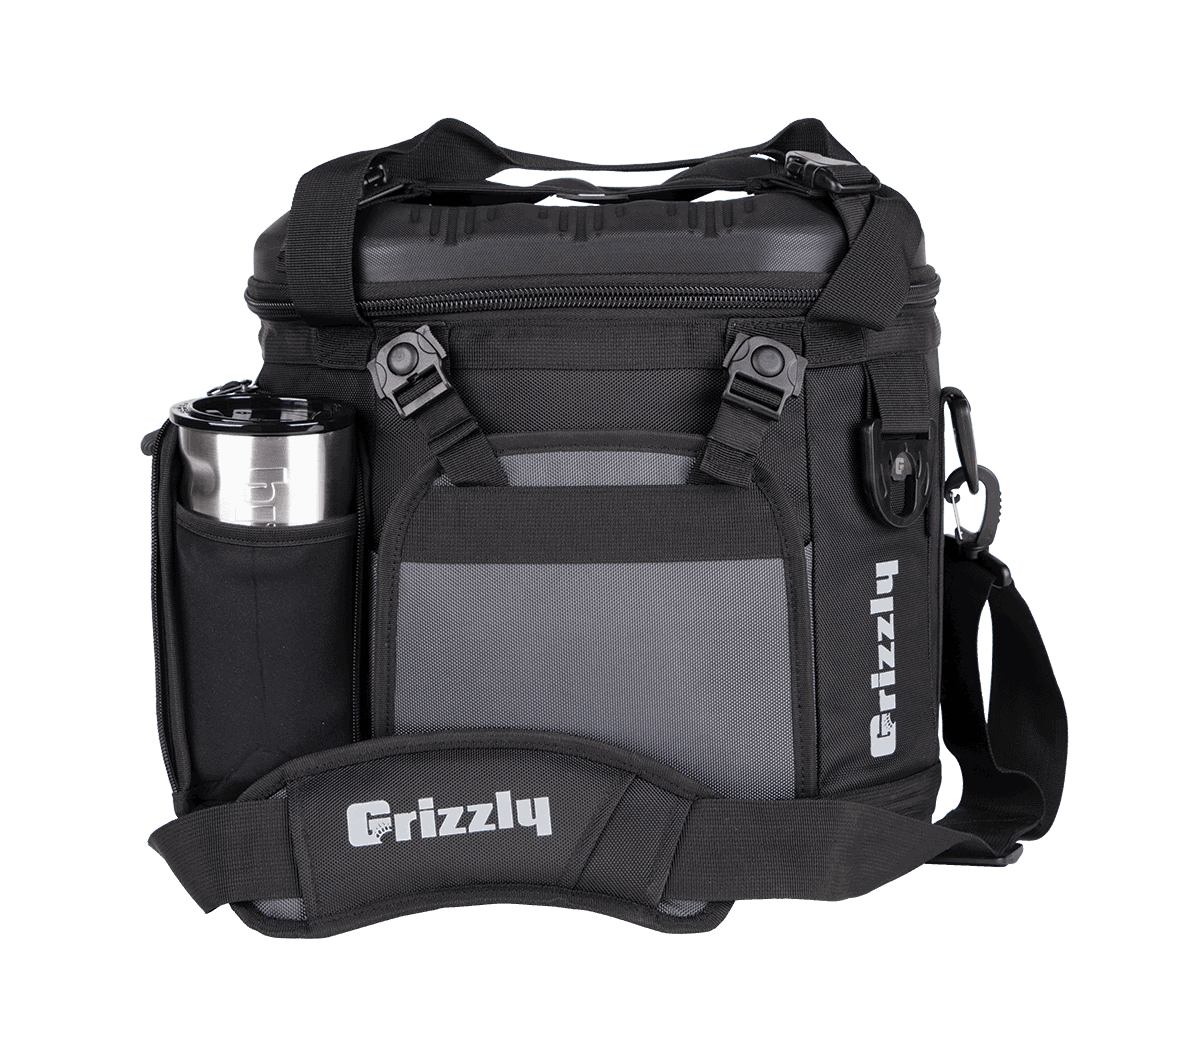 Front View With Grizzly Grip Cup In Pocket Of Grizzly Drifter 20 Soft Sided Cooler In Black/Gunmetal